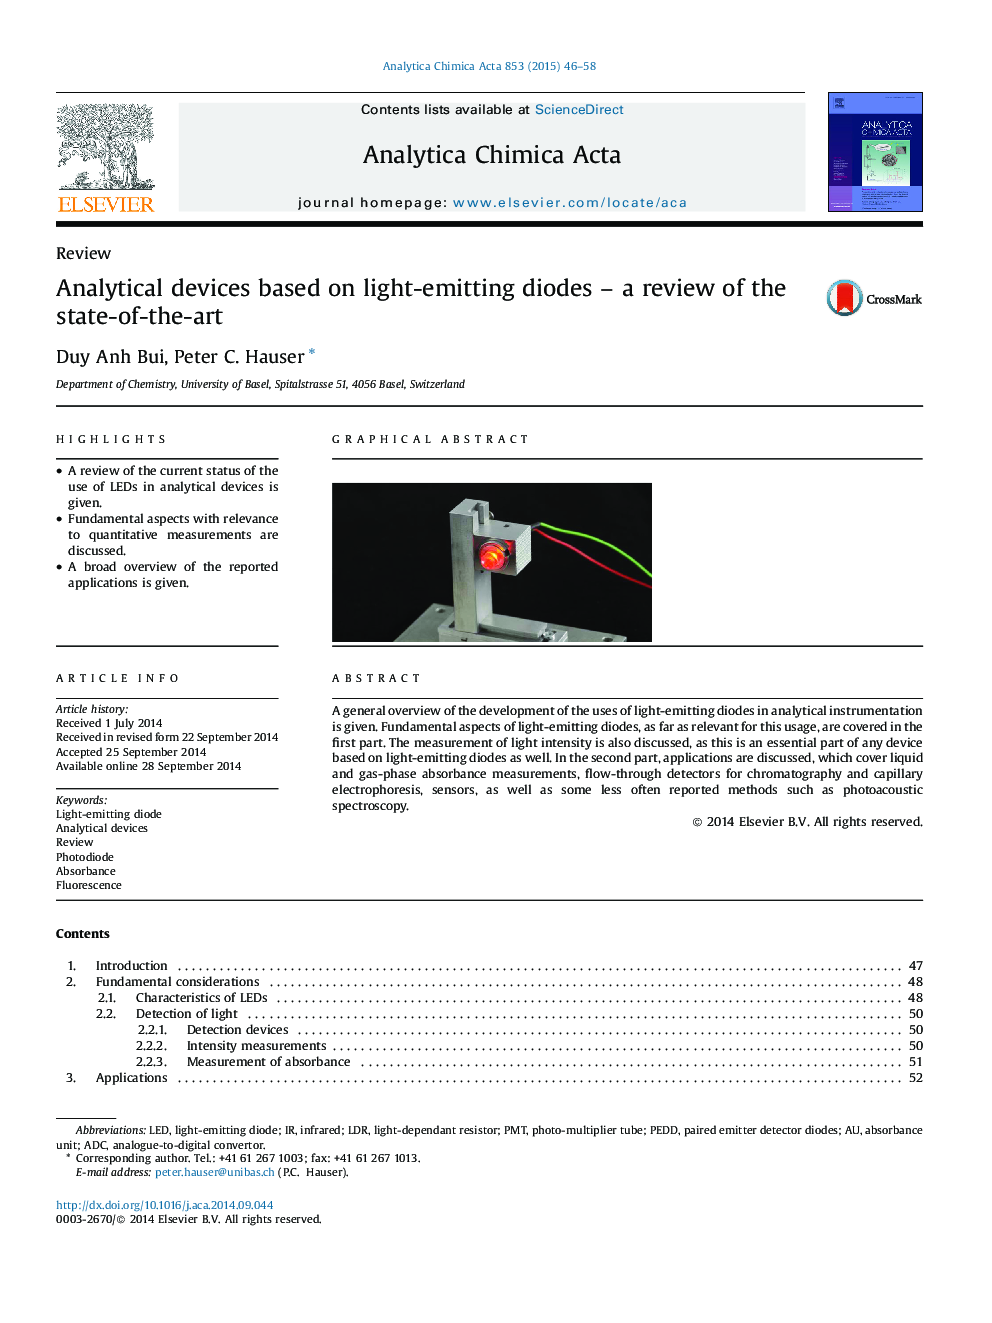 Analytical devices based on light-emitting diodes – a review of the state-of-the-art